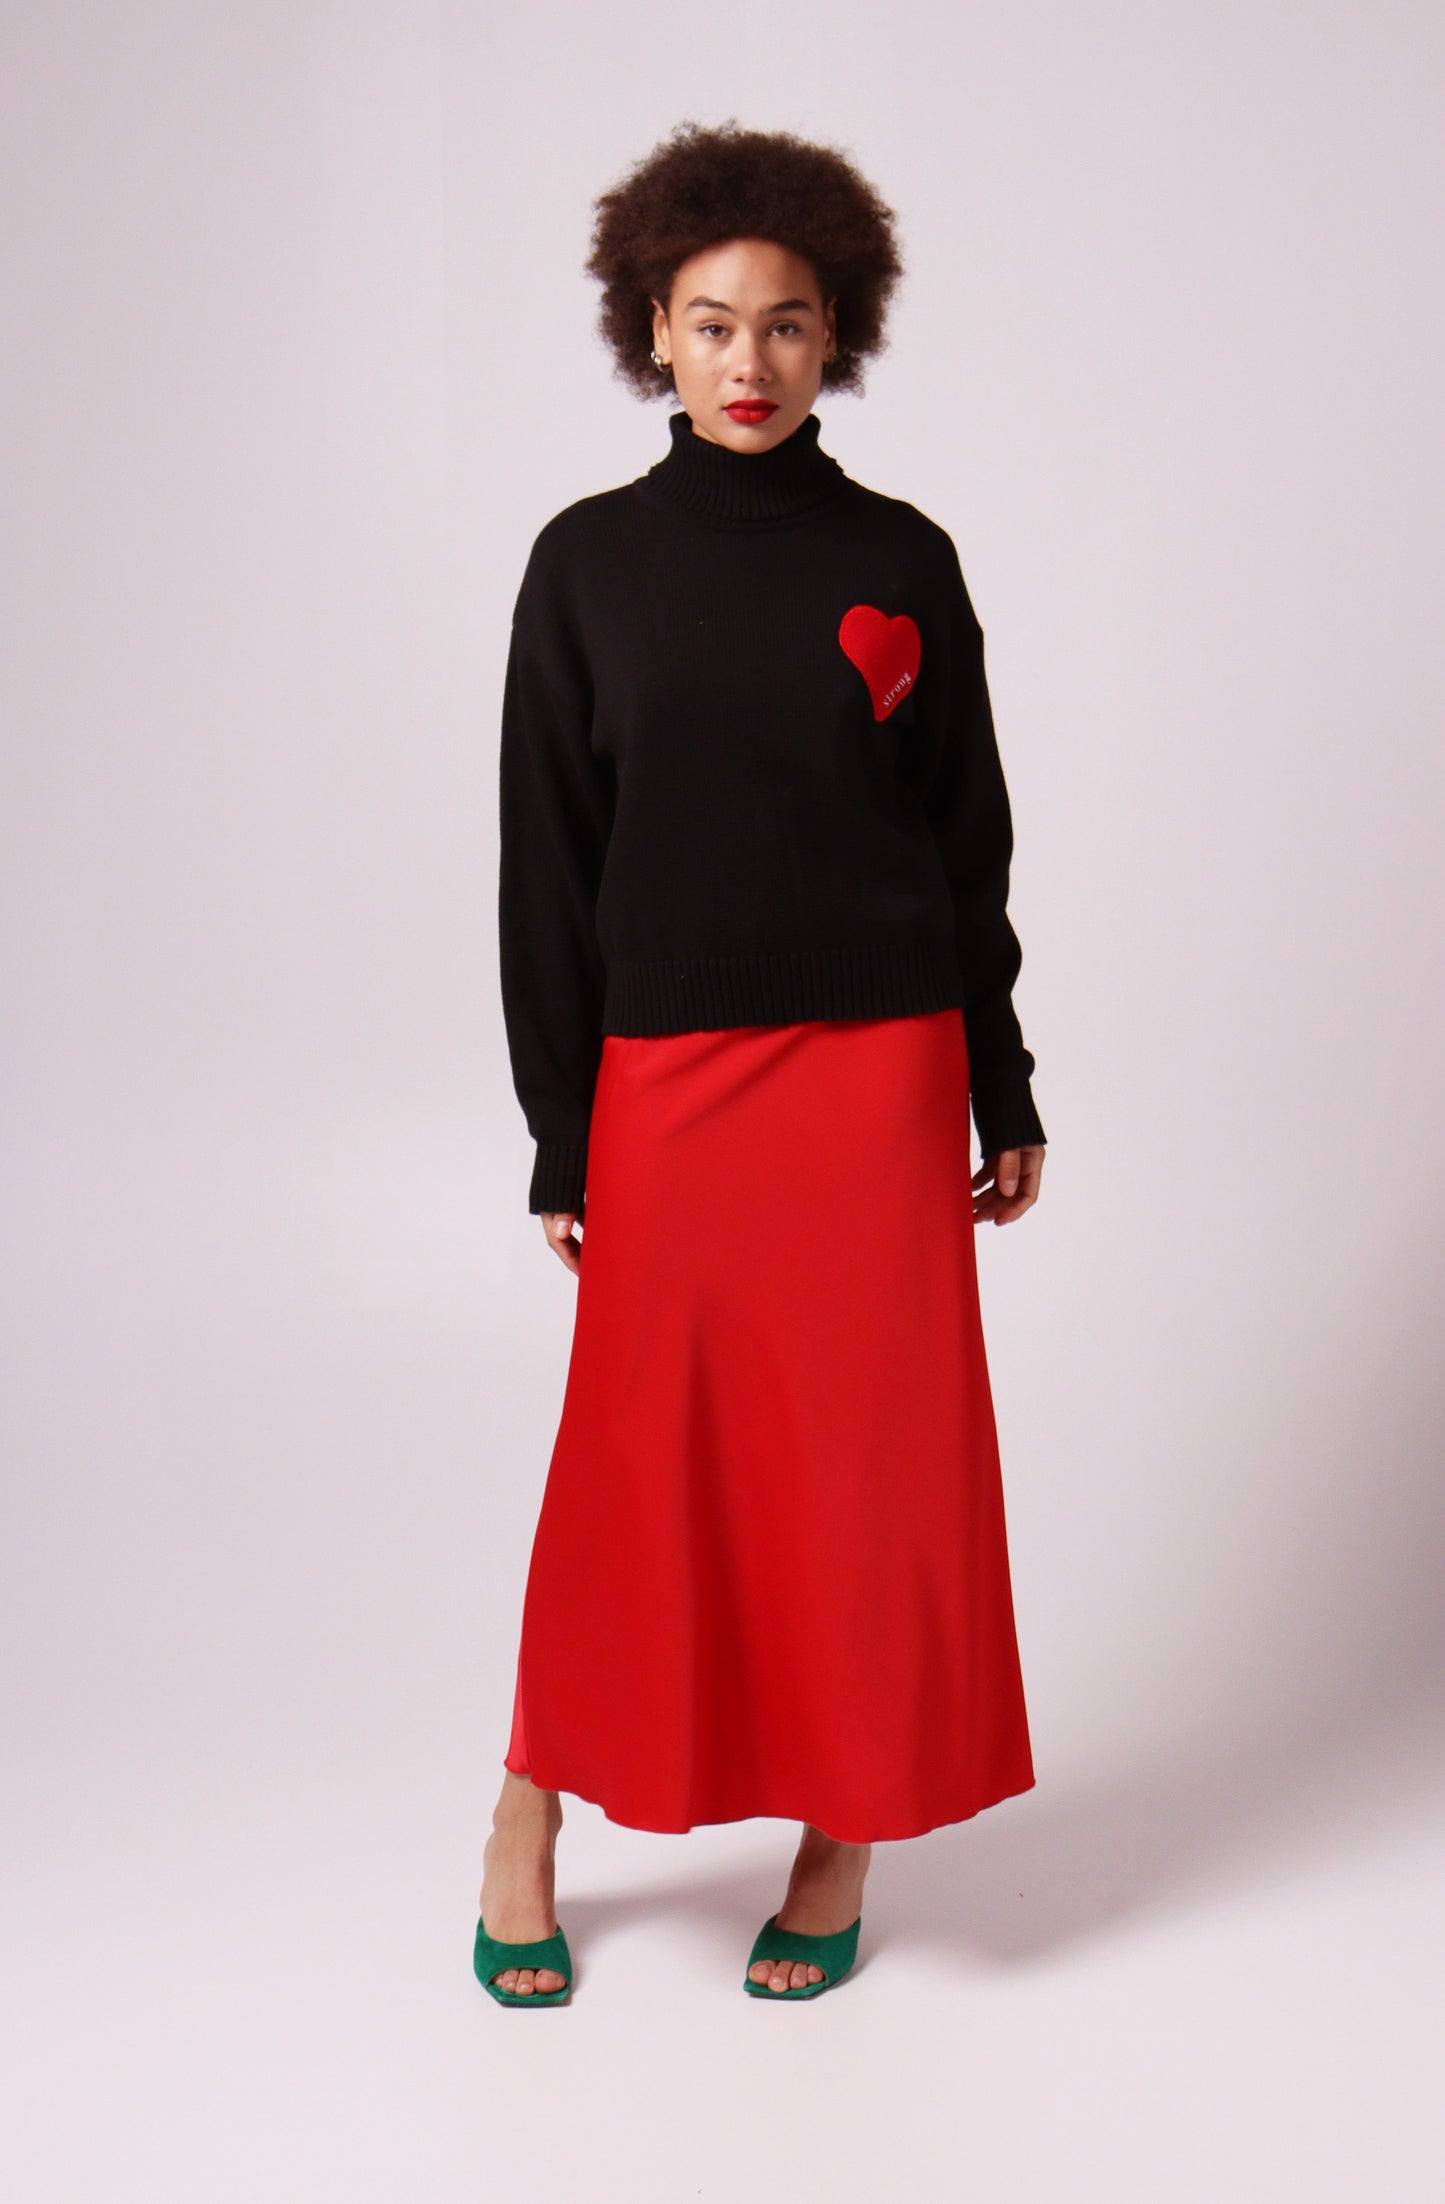 Black cotton turtle neck with a "heart" embroidery